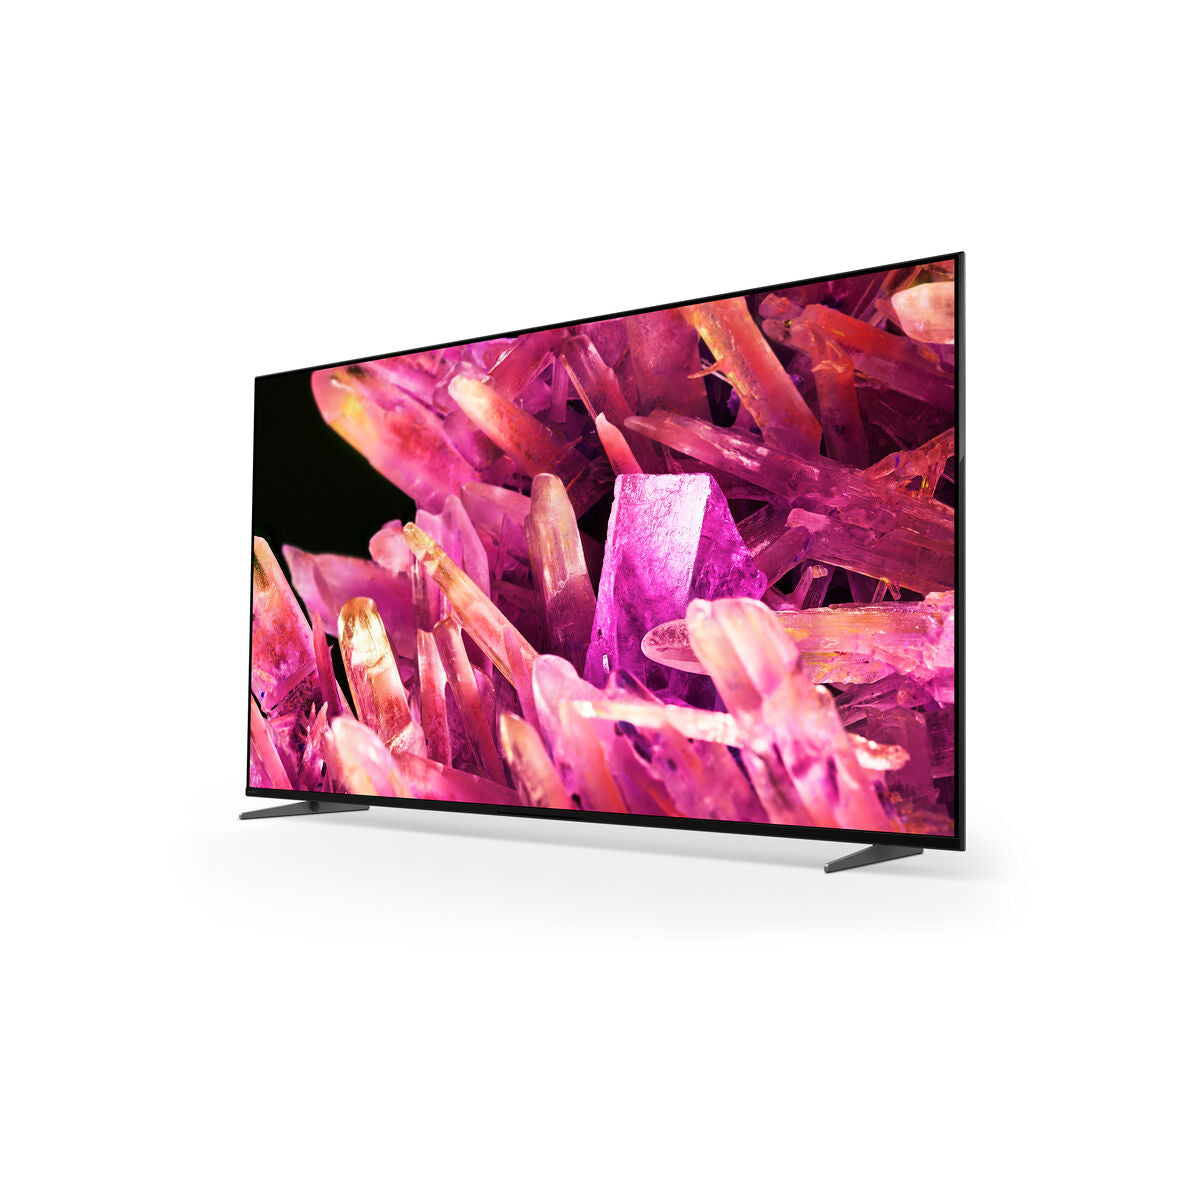 Smart TV Sony XR65X90KAEP 65" Ultra HD 4K LED Dolby Vision, Sony, Electronics, TV, Video and home cinema, smart-tv-sony-xr65x90kaep-65-ultra-hd-4k-led-dolby-vision, : 65 INCHES 165 CM, :65 INCHES or 165.1 CM, :Direct LED, :Ultra HD, Brand_Sony, category-reference-2609, category-reference-2625, category-reference-2931, category-reference-t-18805, category-reference-t-19653, cinema and television, Condition_NEW, entertainment, Price_+ 1000, RiotNook